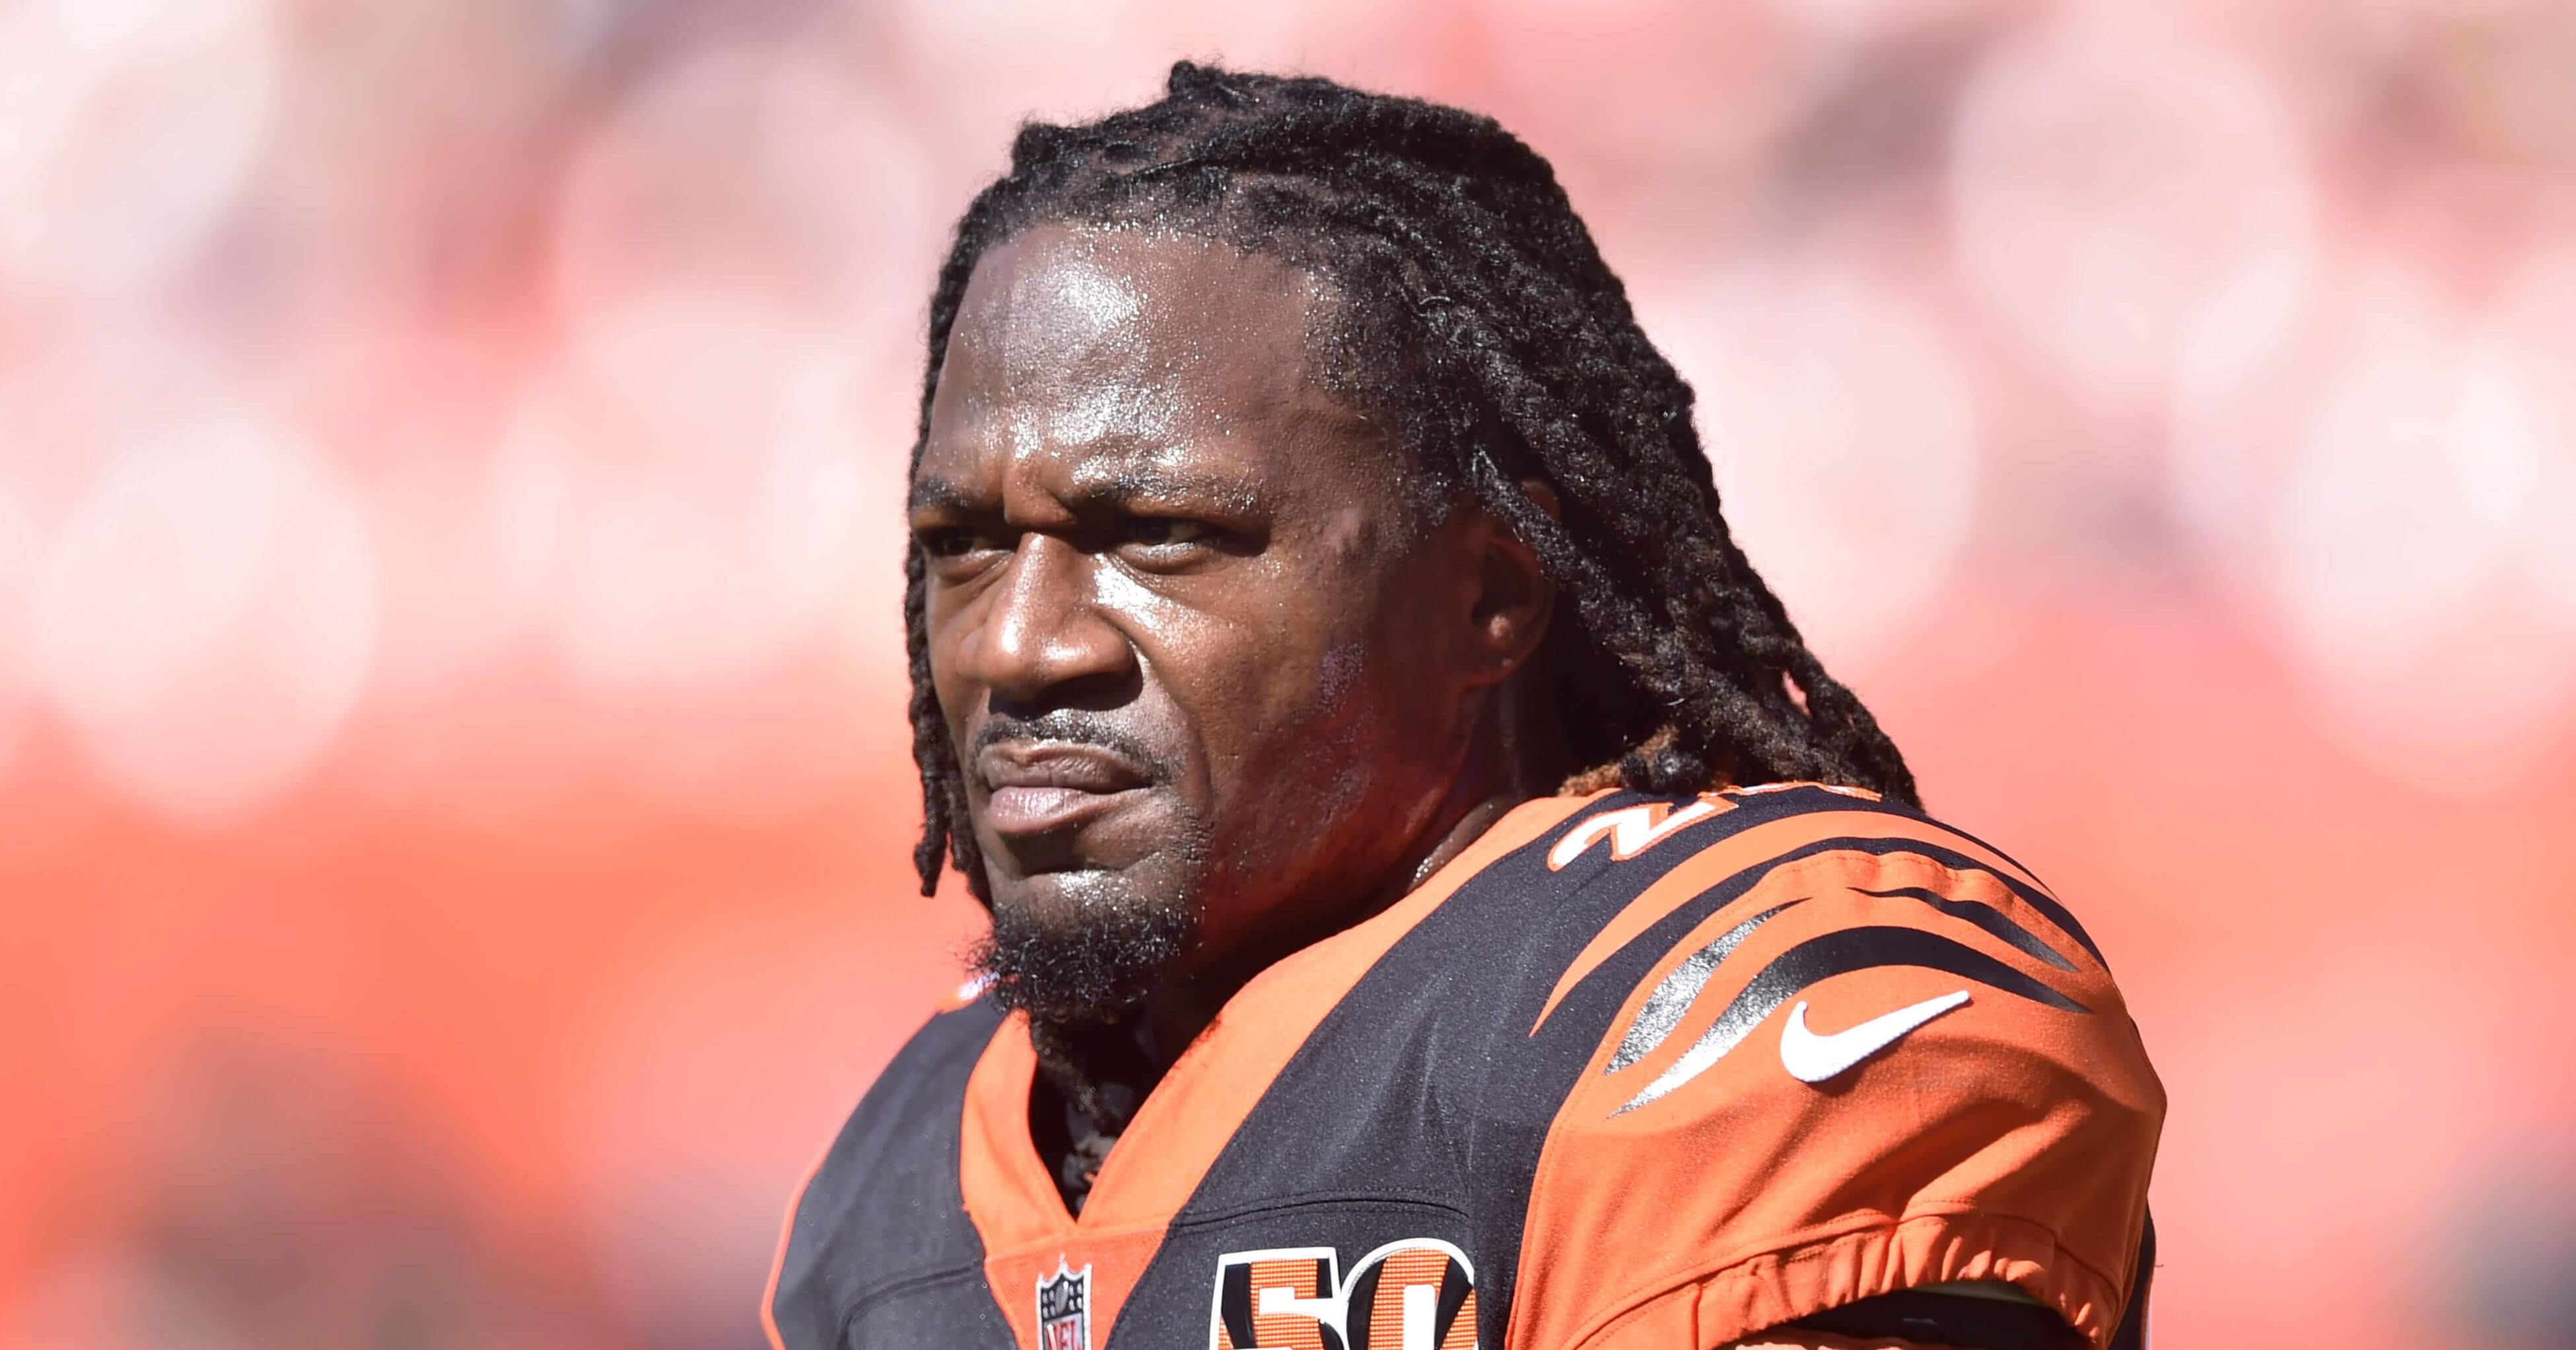 FILE - In this Oct. 1, 2017, file photo, Cincinnati Bengals cornerback Adam "Pacman" Jones walks on the field before an NFL football game against the Cleveland Browns, in Cleveland. Police say Cincinnati Bengals cornerback Adam "Pacman" Jones was attacked during a run-in with a facility-service employee at the airport in Atlanta. Atlanta Police spokesman Jarius Daugherty says Jones confronted ABM Industries employee Frank Ragin after Ragin made a "gesture" toward the football player Tuesday night, July 10, 2018, at Hartsfield-Jackson Atlanta International Airport. (AP Photo/David Richard, File)